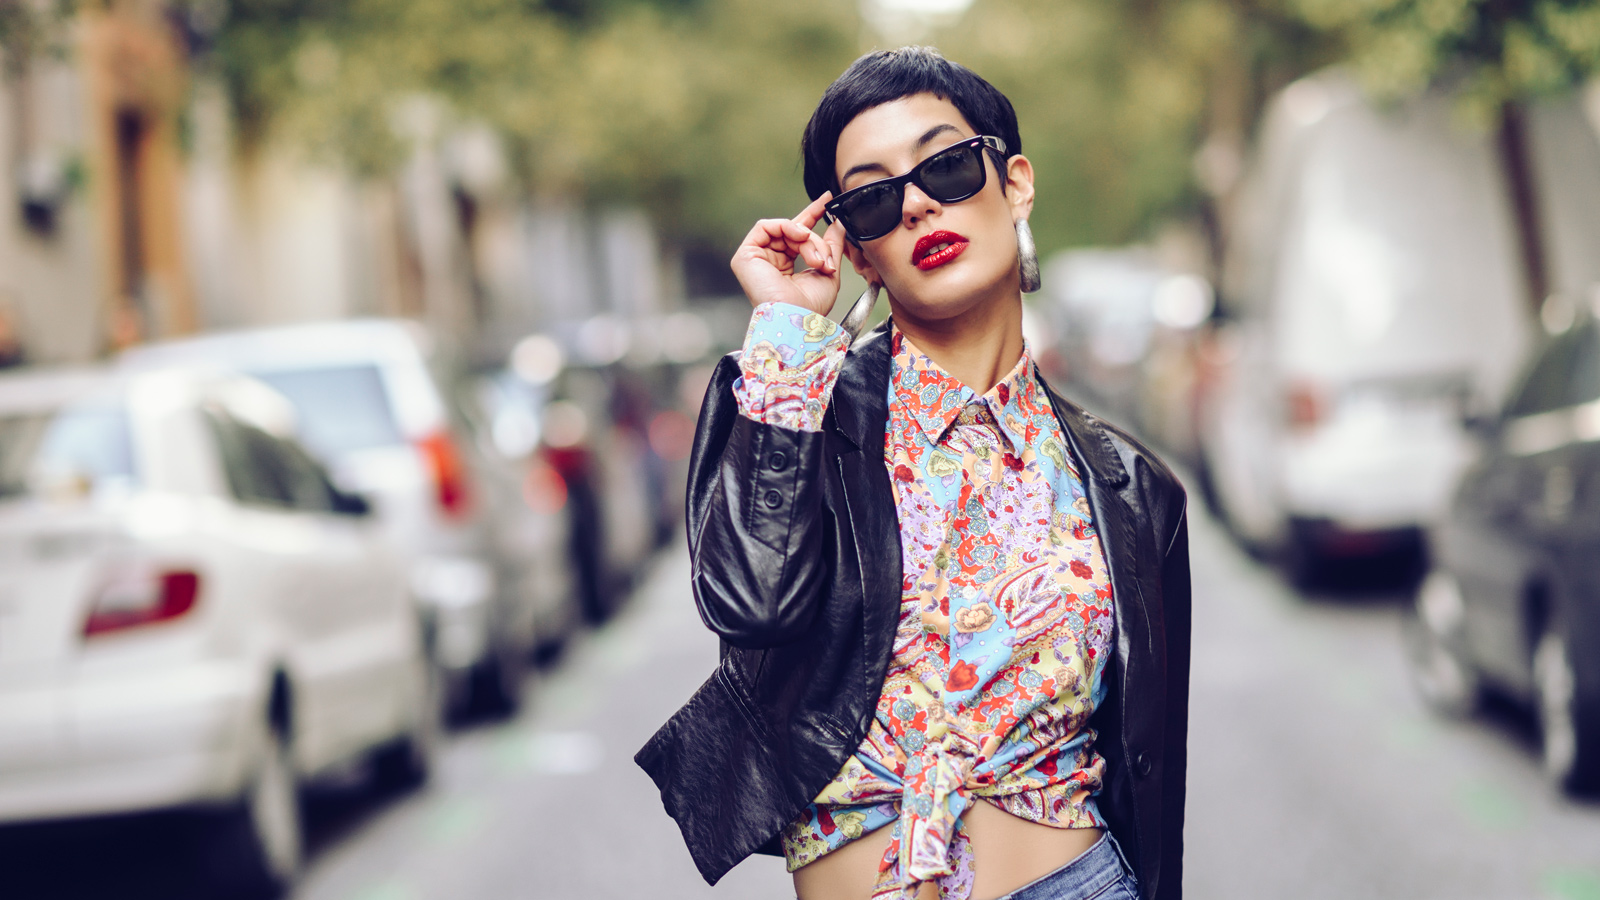 Portrait of fashionable young woman wearing sunglasses and leather jacket